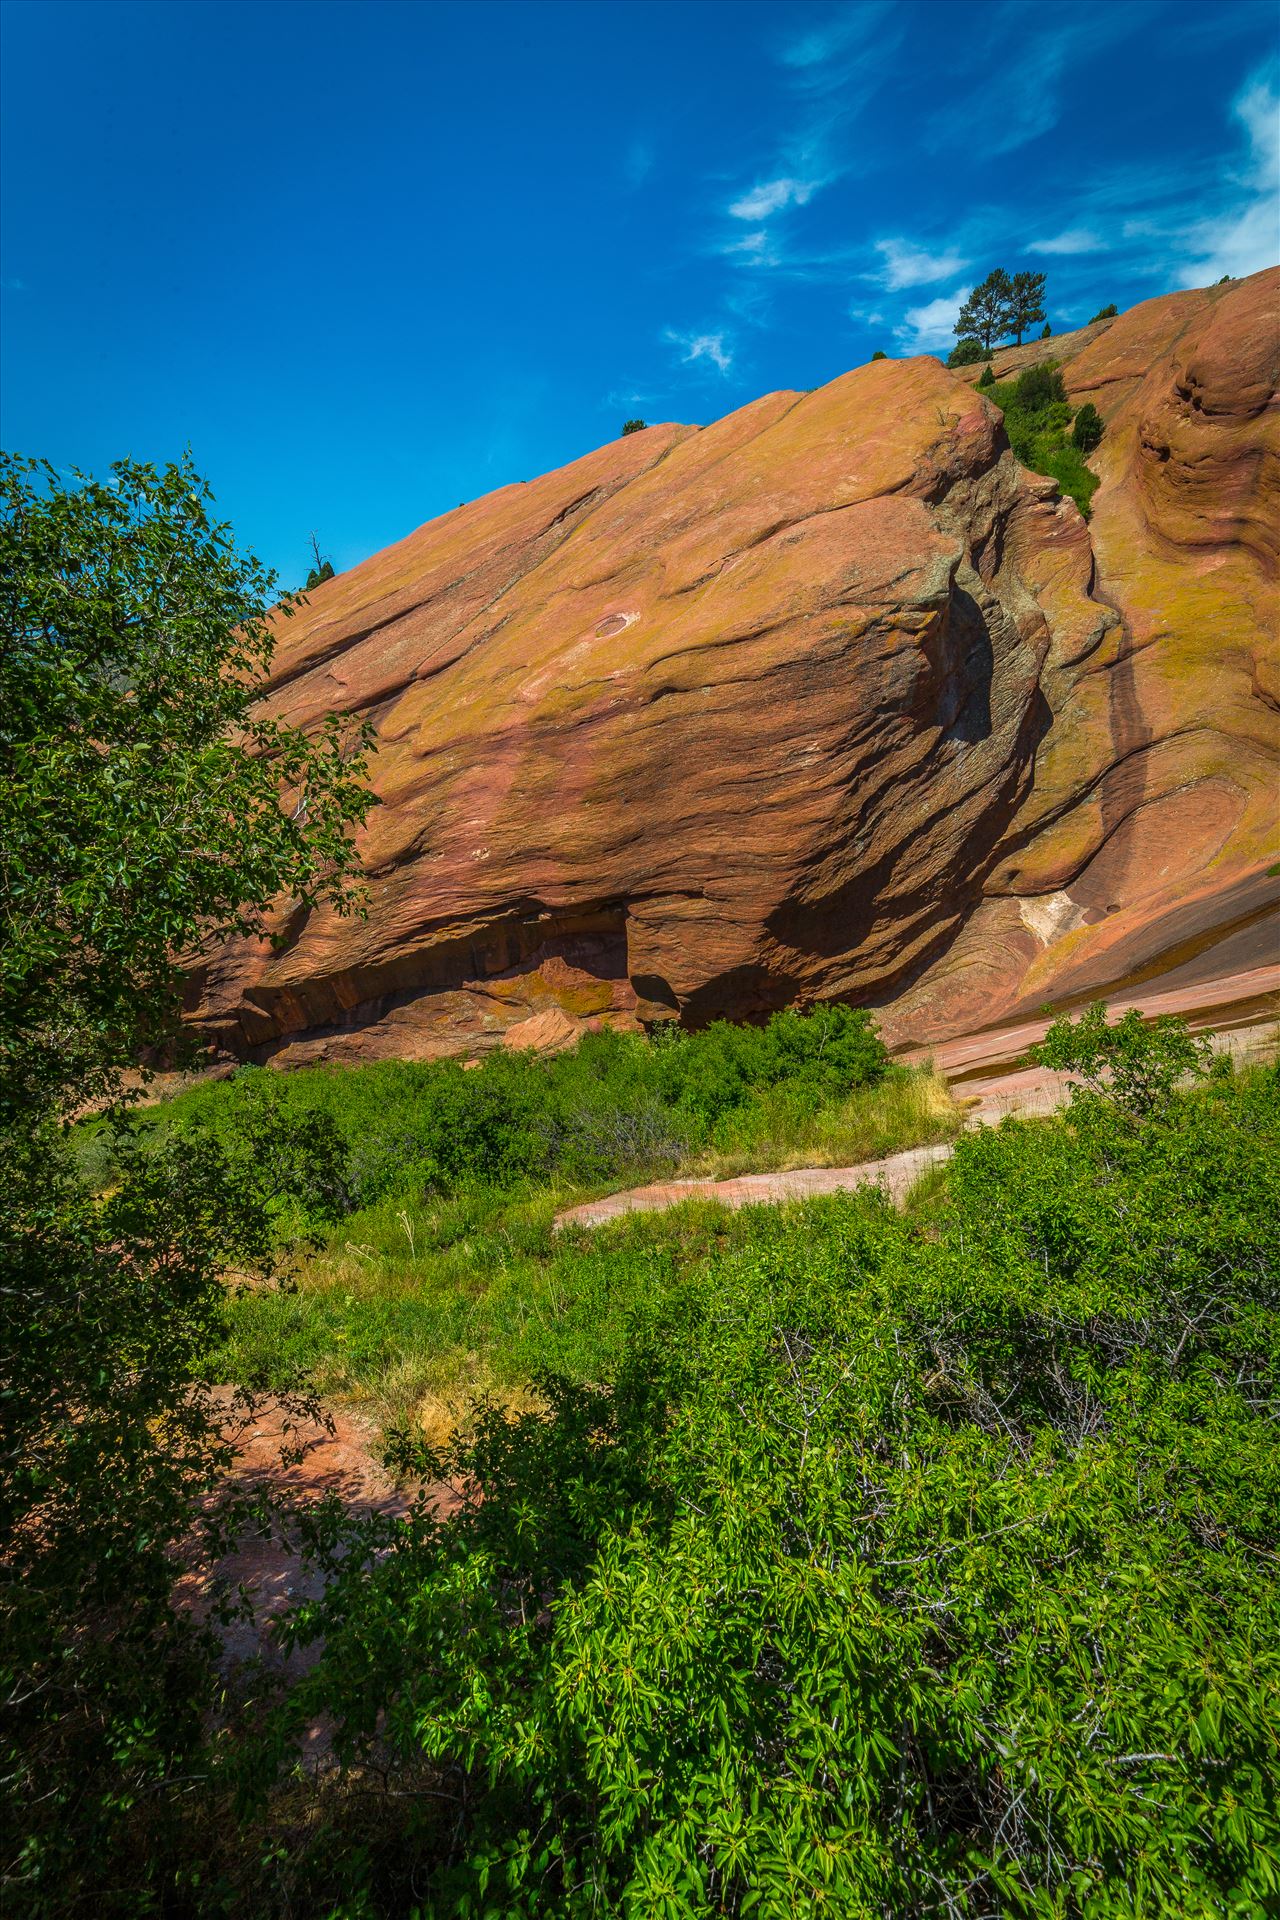 Red Rocks Park - From the Trading Post in Red Rocks Park, a brilliant blue-bird sky brings out all the colors in the area's geological features. by Scott Smith Photos